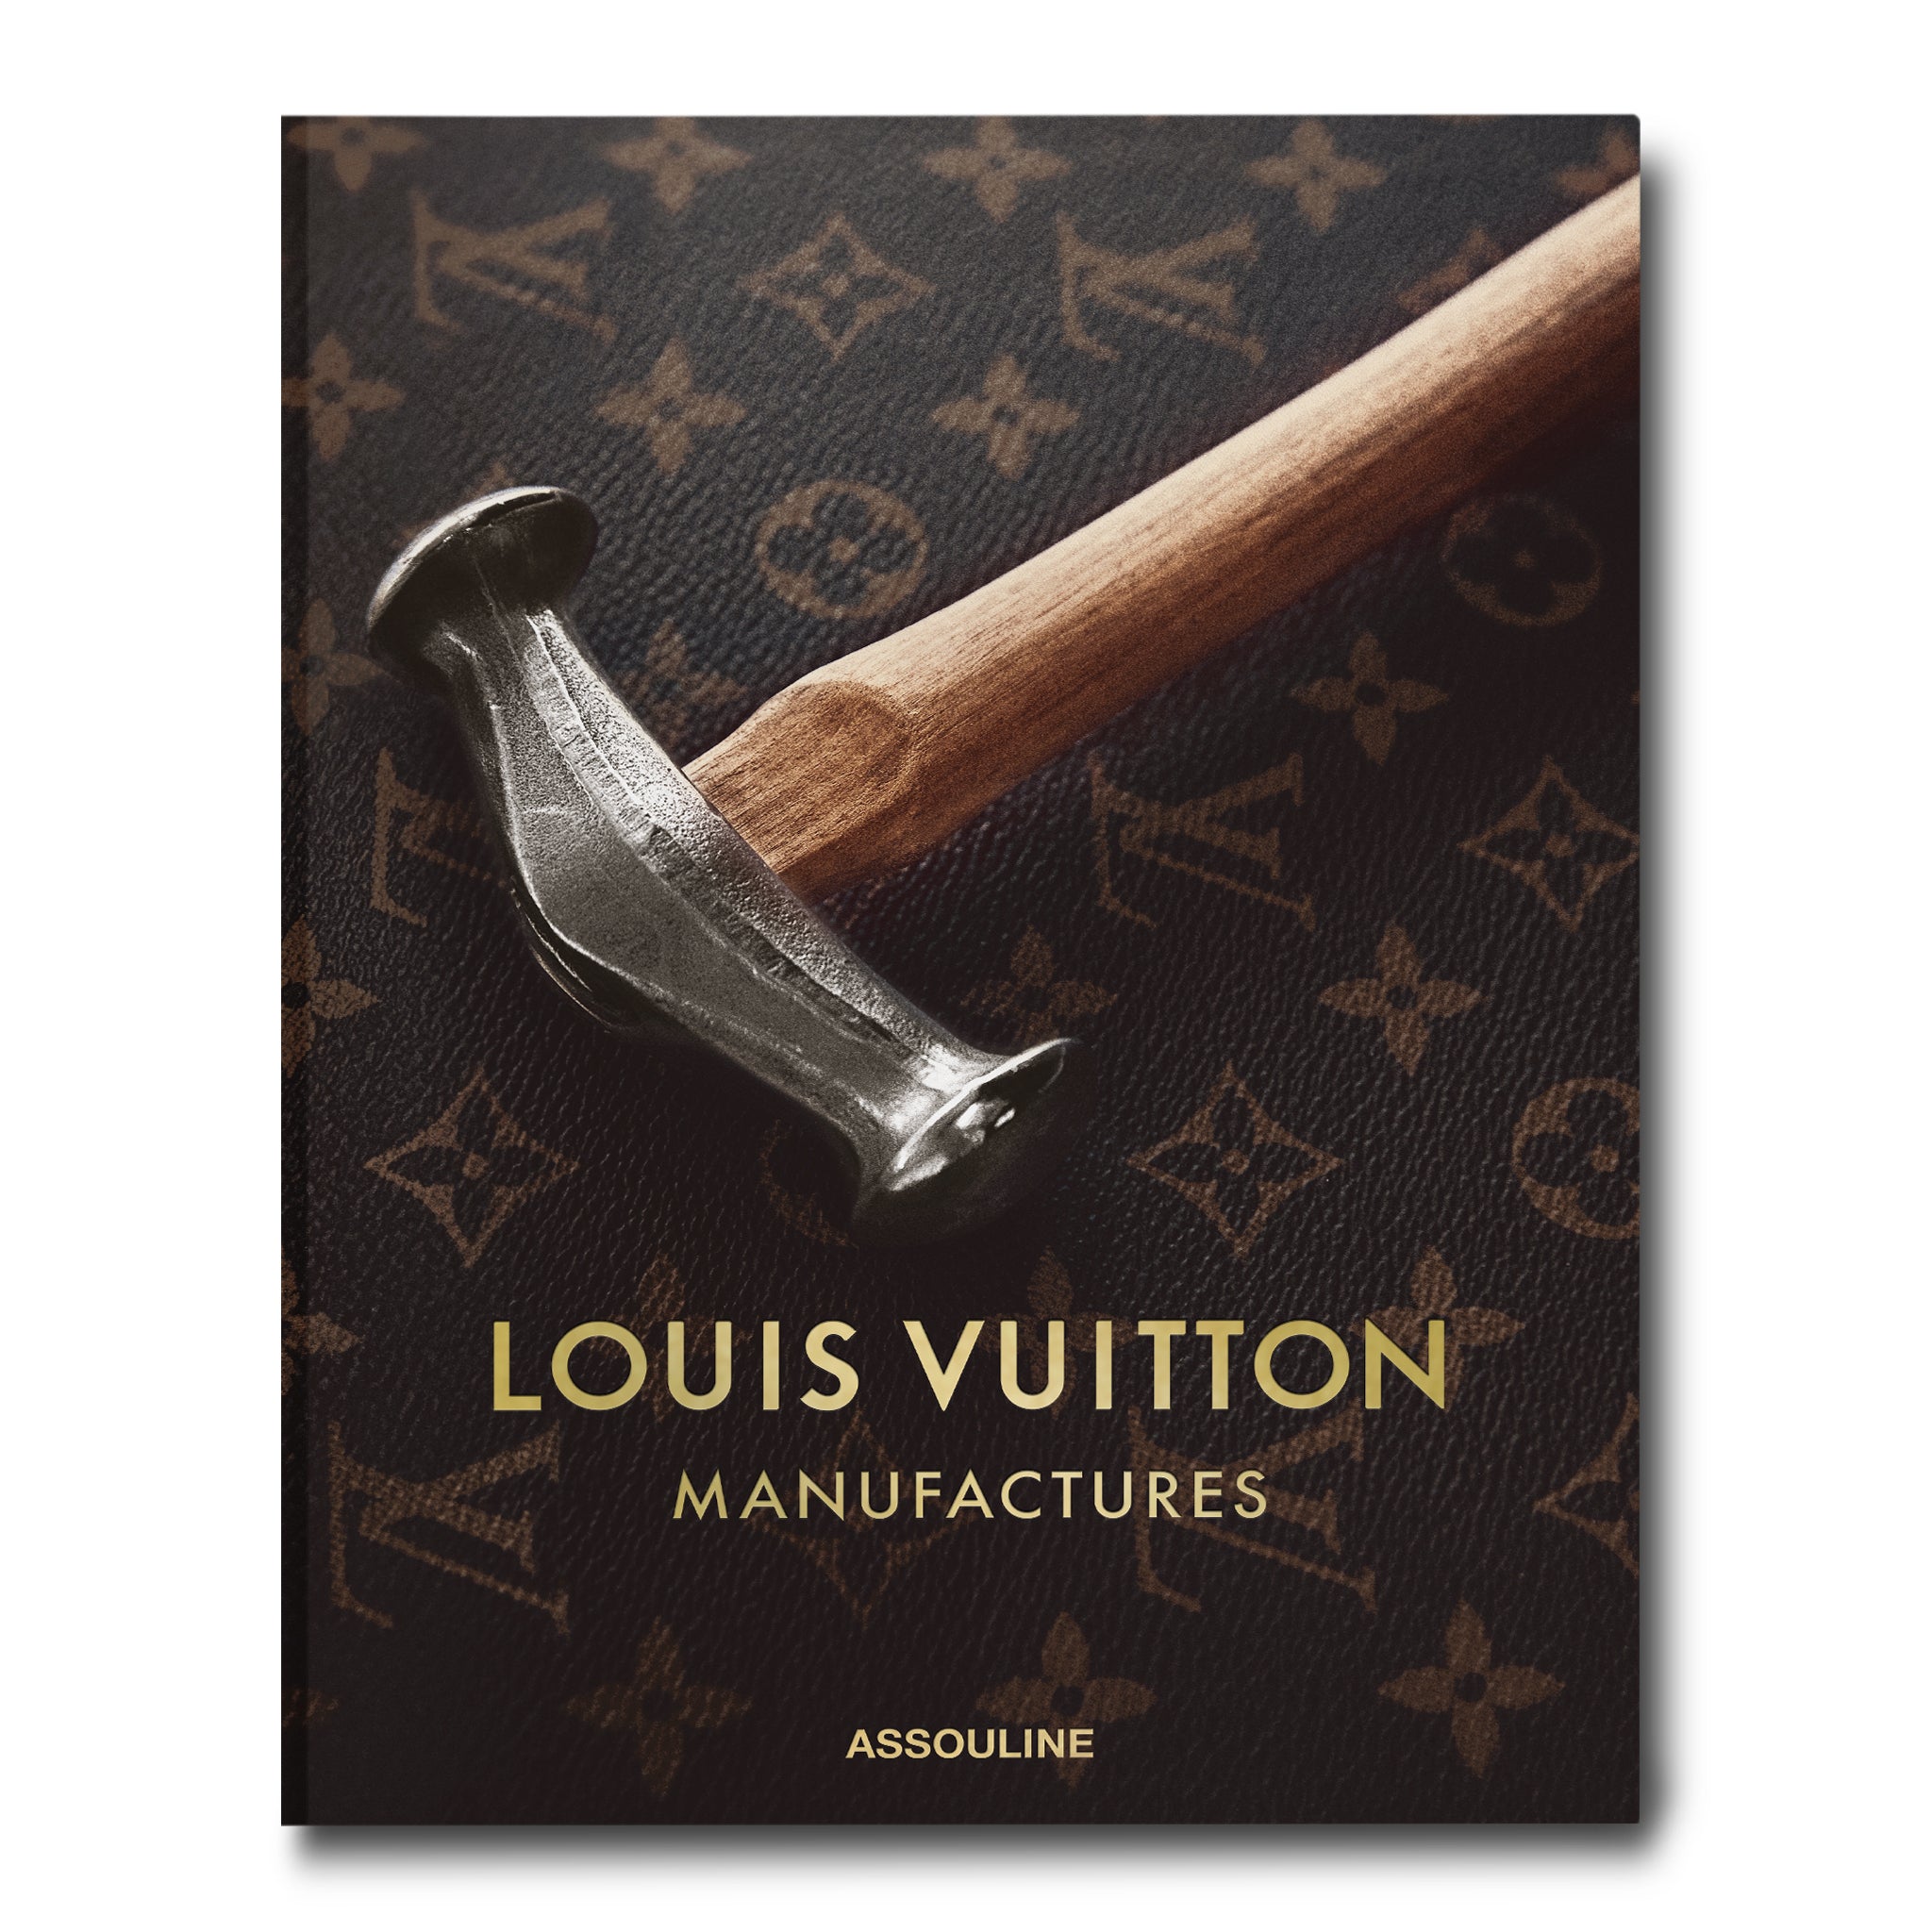 Spot these 10 collectibles from the Louis Vuitton Savoir-Faire